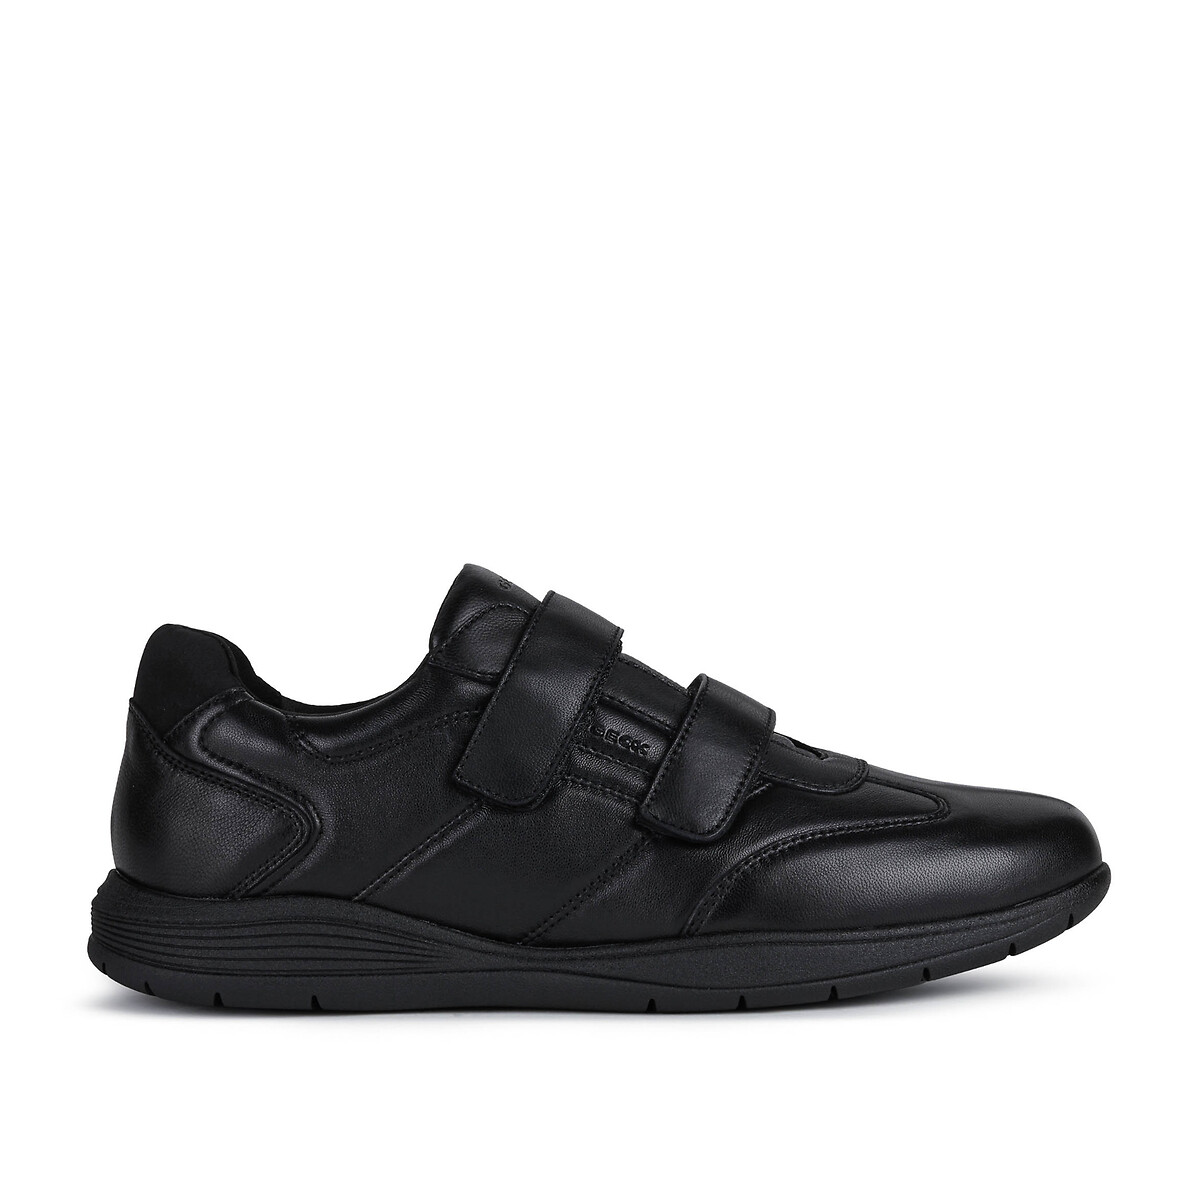 spherica ec2 breathable trainers in leather with touch 'n' close fastening